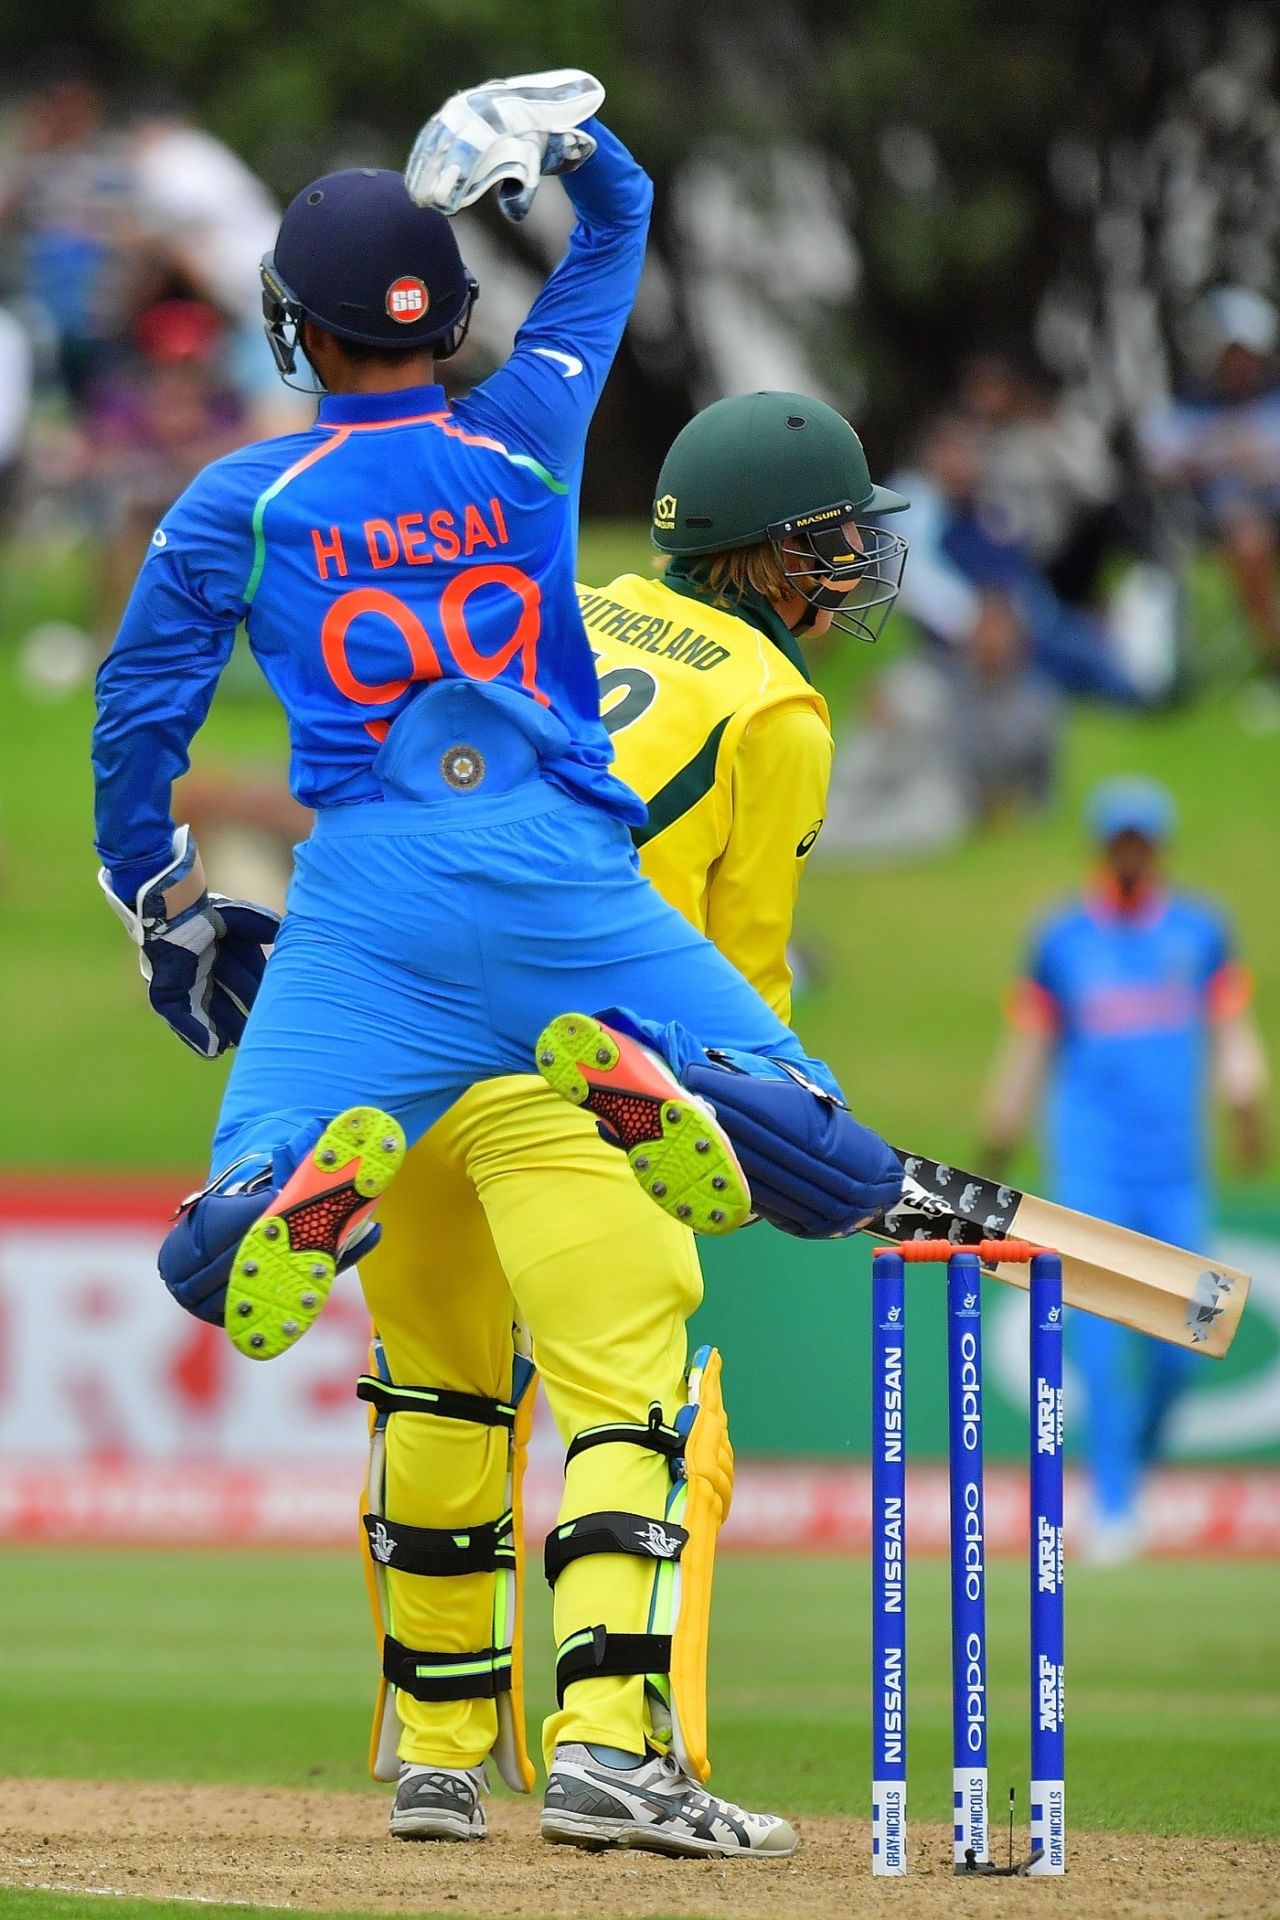 Harvik Desai leaps after taking a catch to dismiss Will Sutherland, Australia v India, Under-19 World Cup, final, Mount Maunganui, February 3, 2018